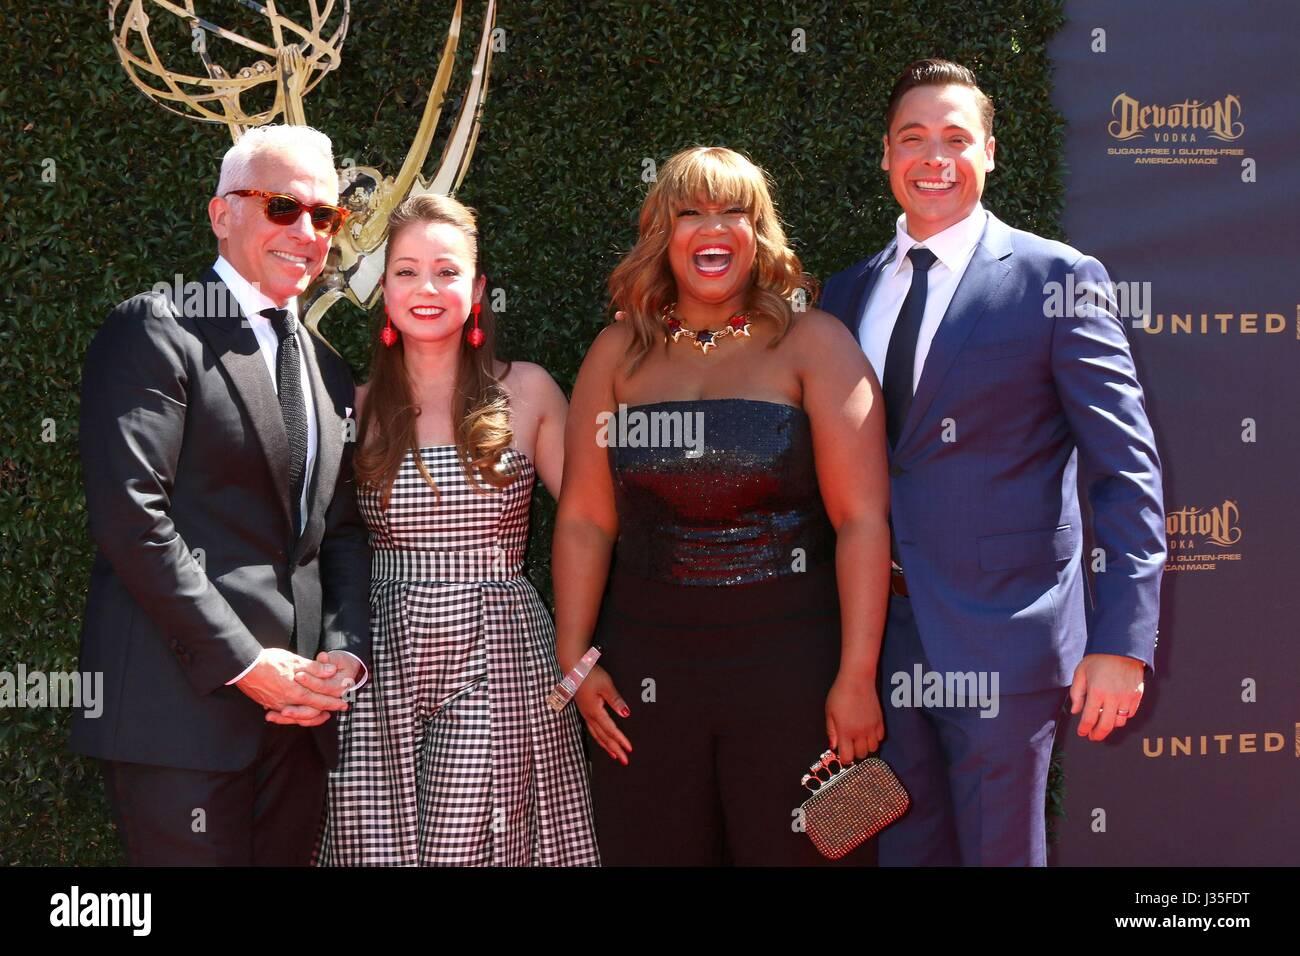 Pasadena, CA. 30th Apr, 2017. The Kitchen, Geoffrey Zakarian, Marcela Valladolid, Sunny Anderson, Jeff Mauro at arrivals for 44th Annual Daytime Emmy Awards - Arrivals 2, Pasadena Civic Center, Pasadena, CA April 30, 2017. Credit: Priscilla Grant/Everett Collection/Alamy Live News Stock Photo